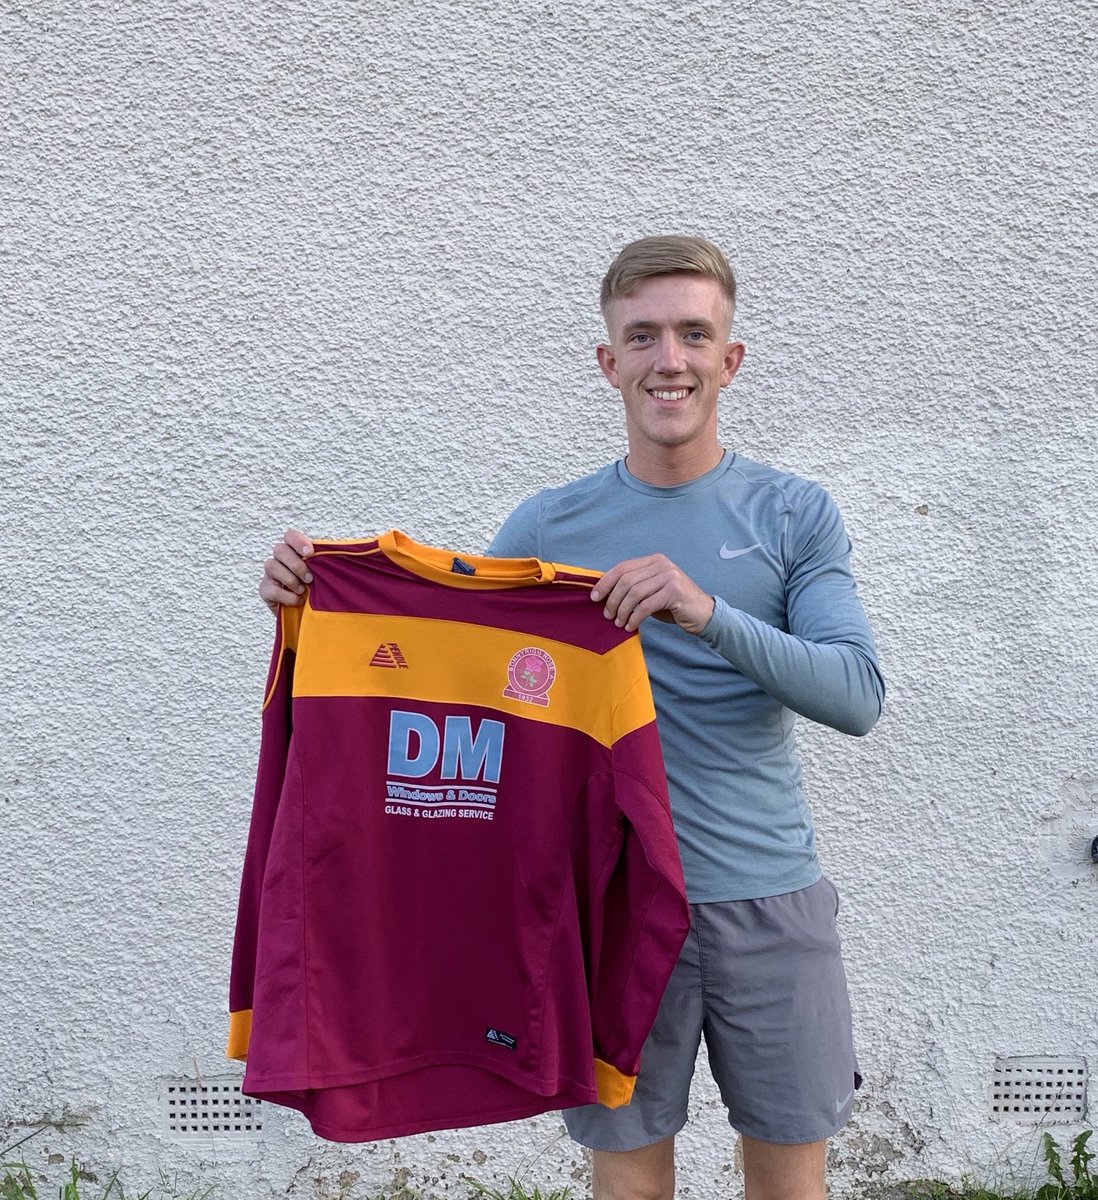 ✍️ We are also delighted to announce the signing of Rhys Young for the upcoming season. Rhys possesses a lot of pace and is comfortable on the ball allowing him to play in many positions. His ability to take on a man and his keen eye for goal ensures he will be an exciting watch